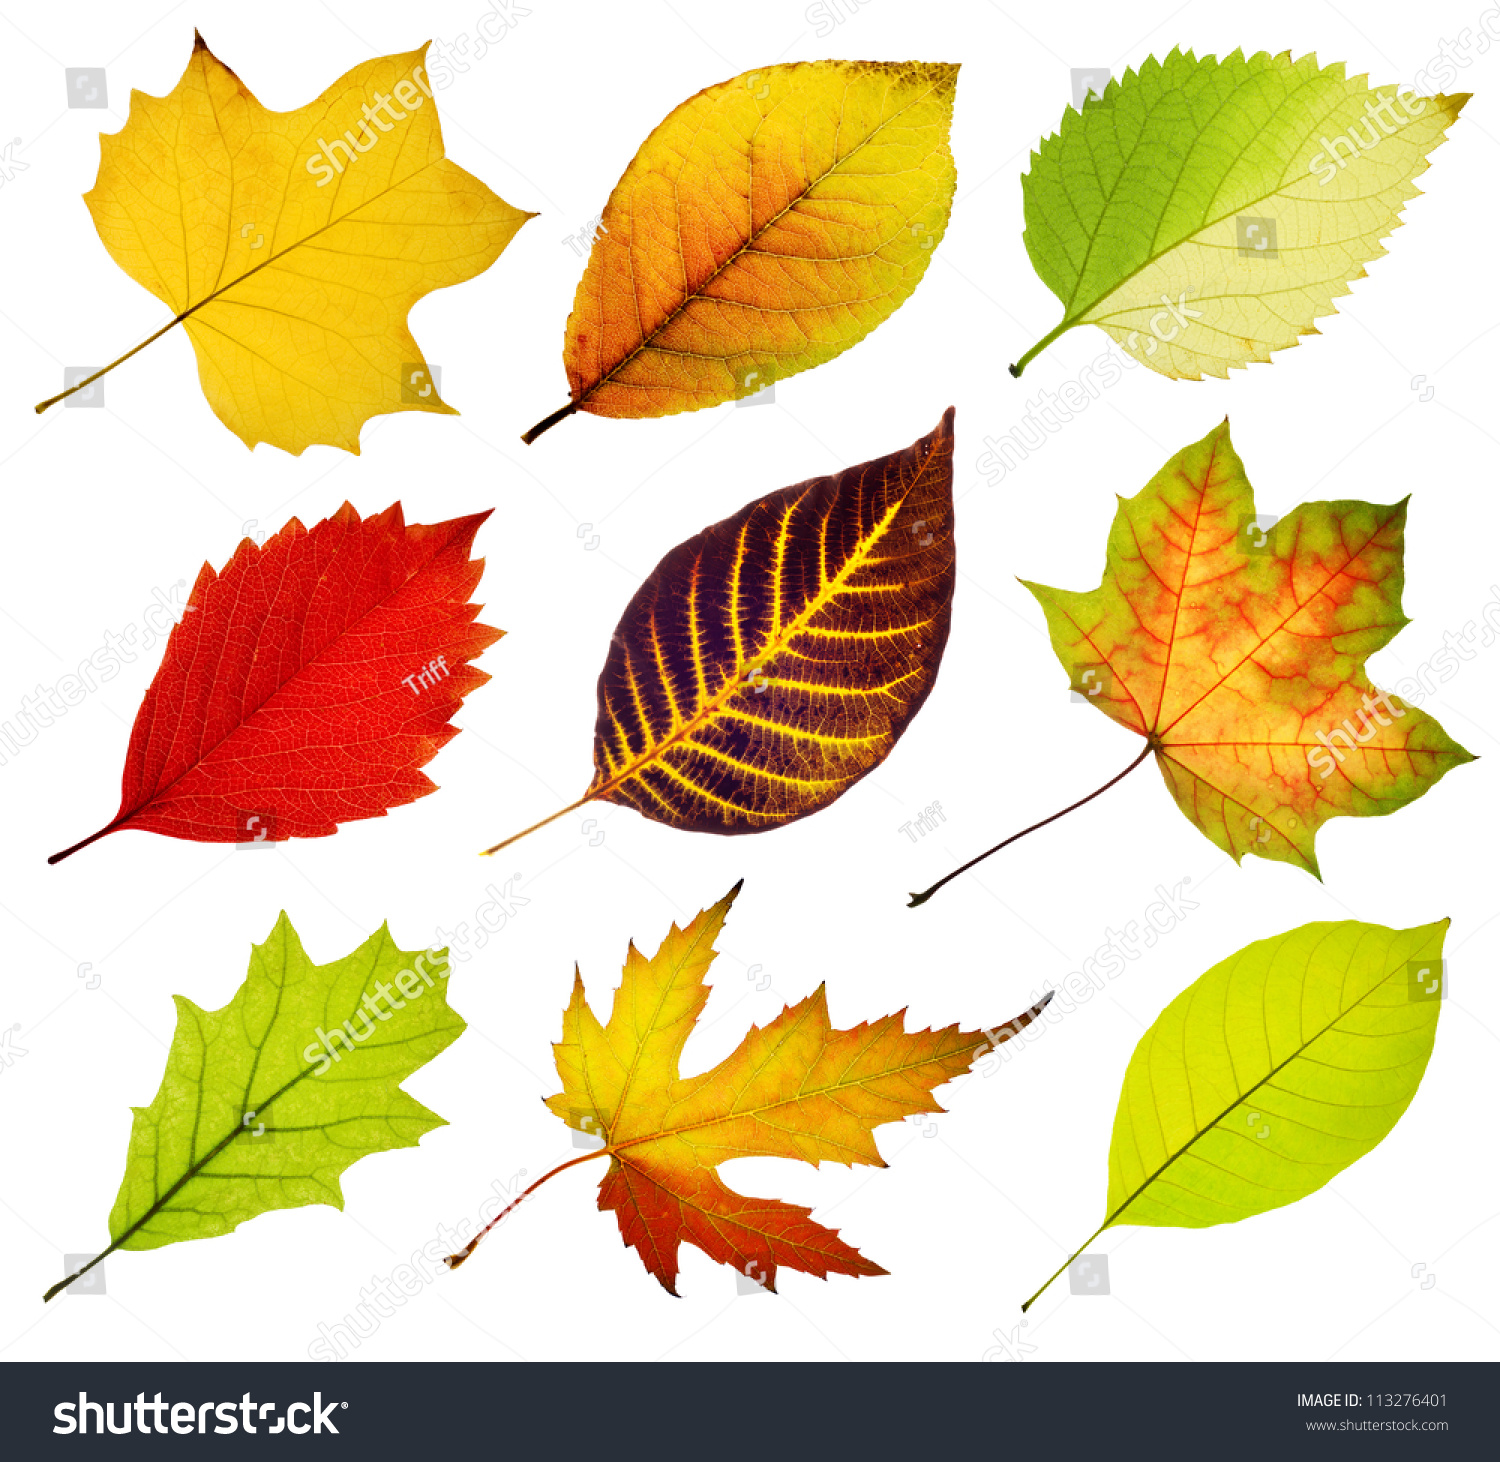 Collection Tree Leaves Isolated On White Stock Photo 113276401 ...